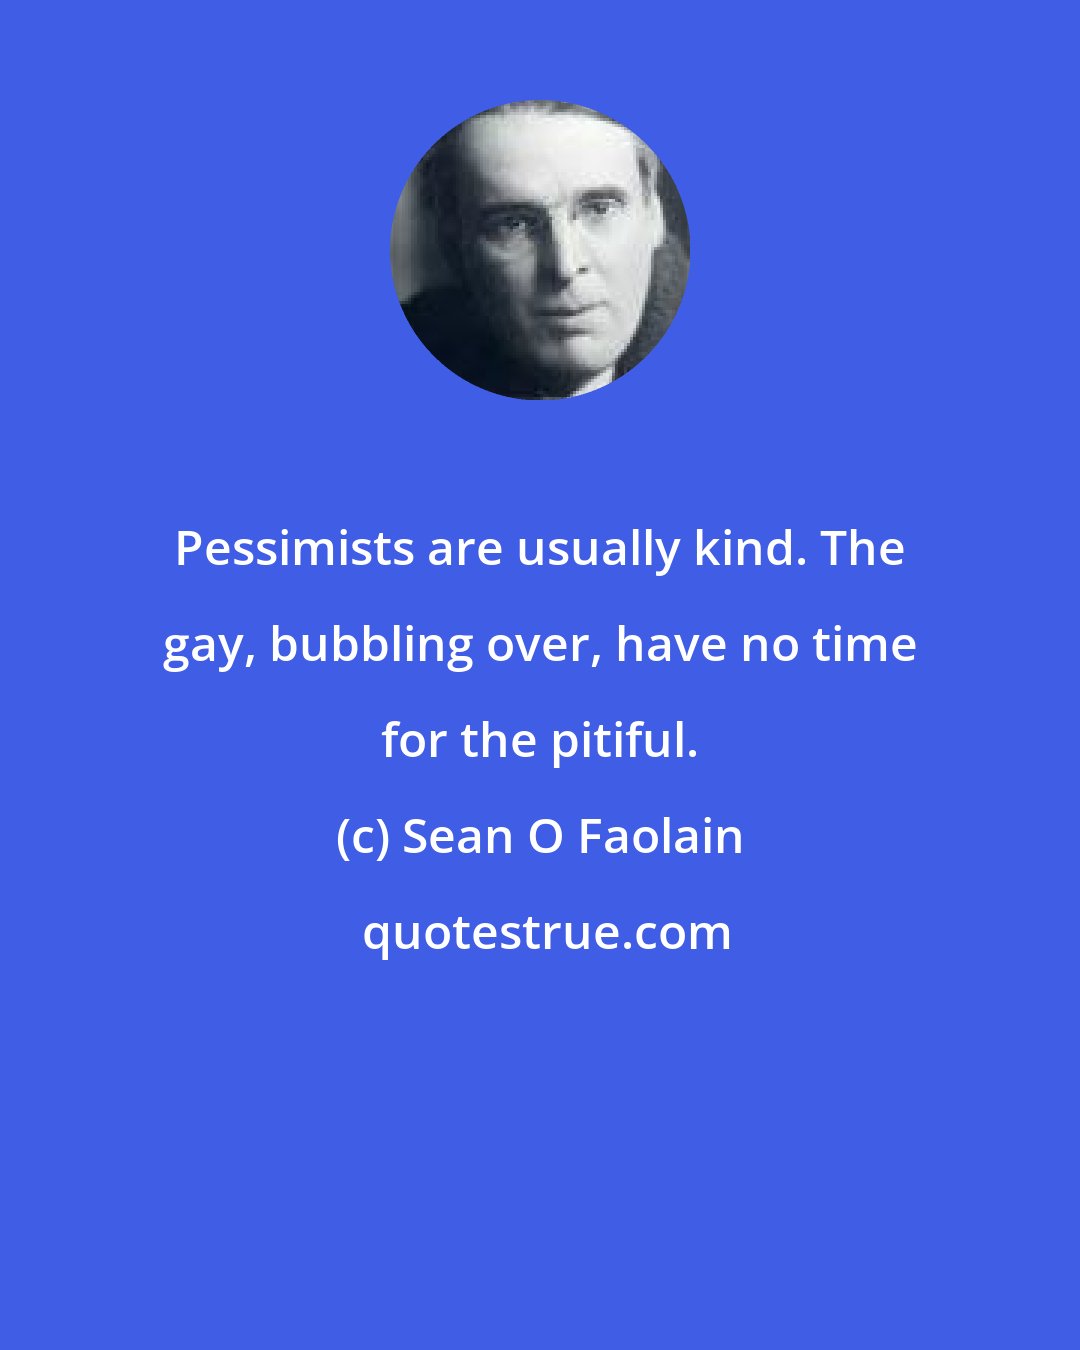 Sean O Faolain: Pessimists are usually kind. The gay, bubbling over, have no time for the pitiful.